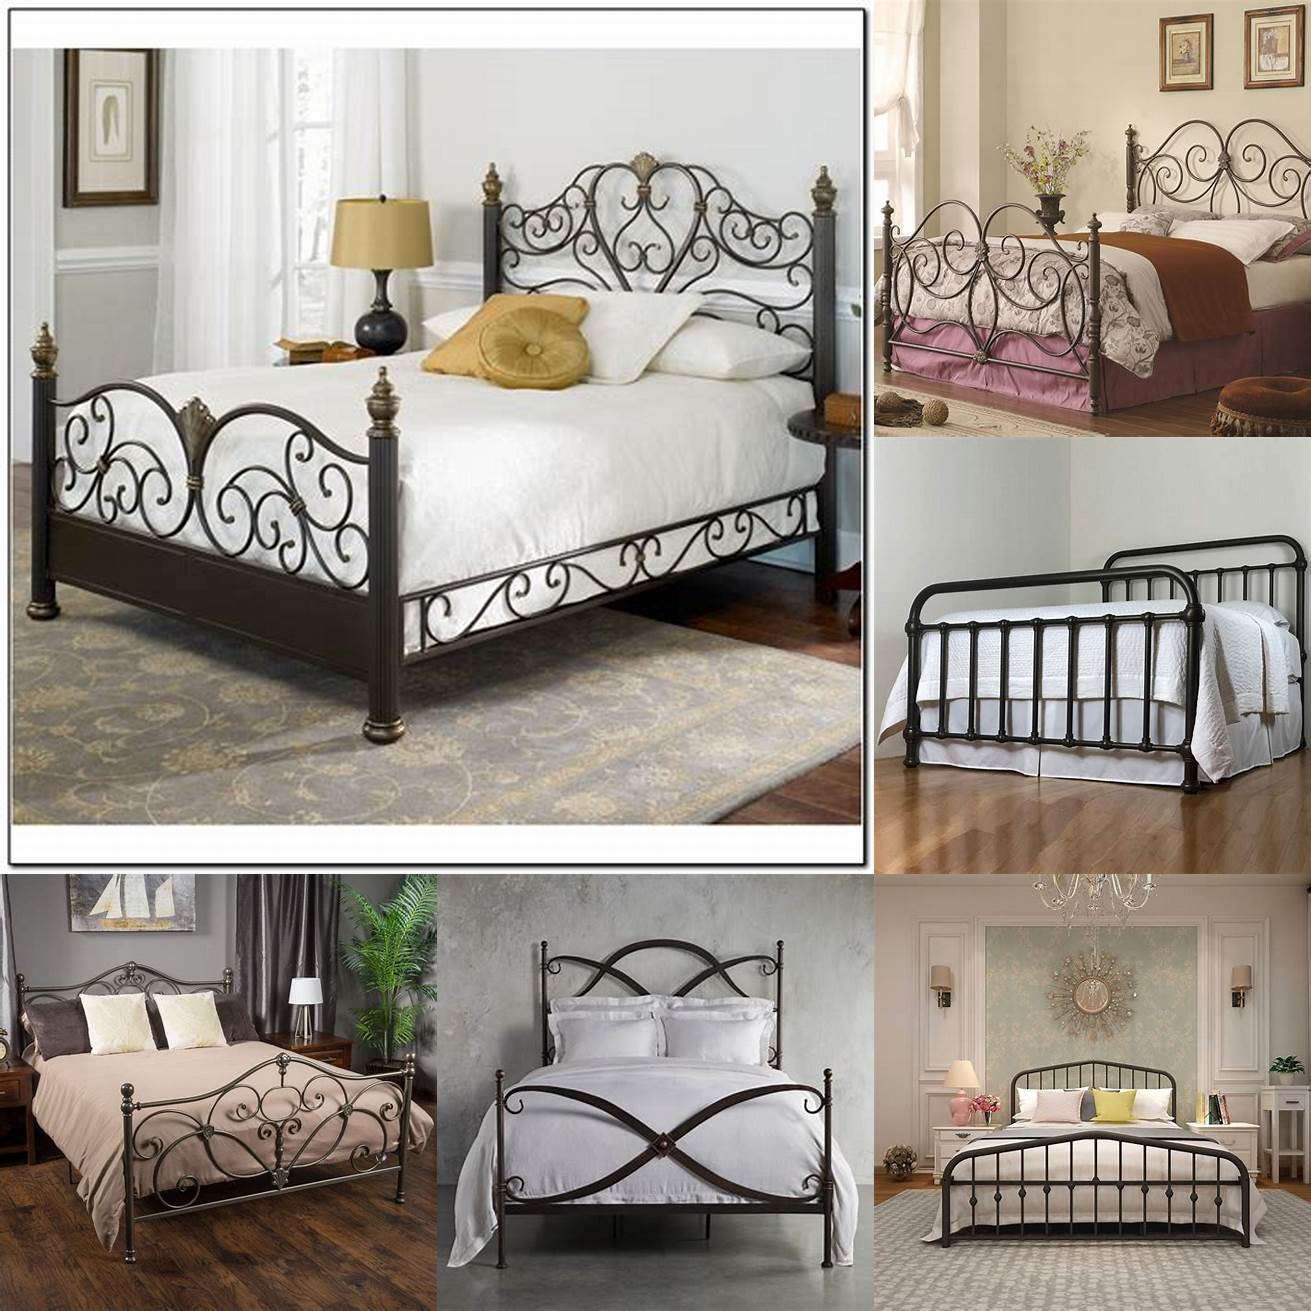 Durability Iron bed frames are known for their strength and durability